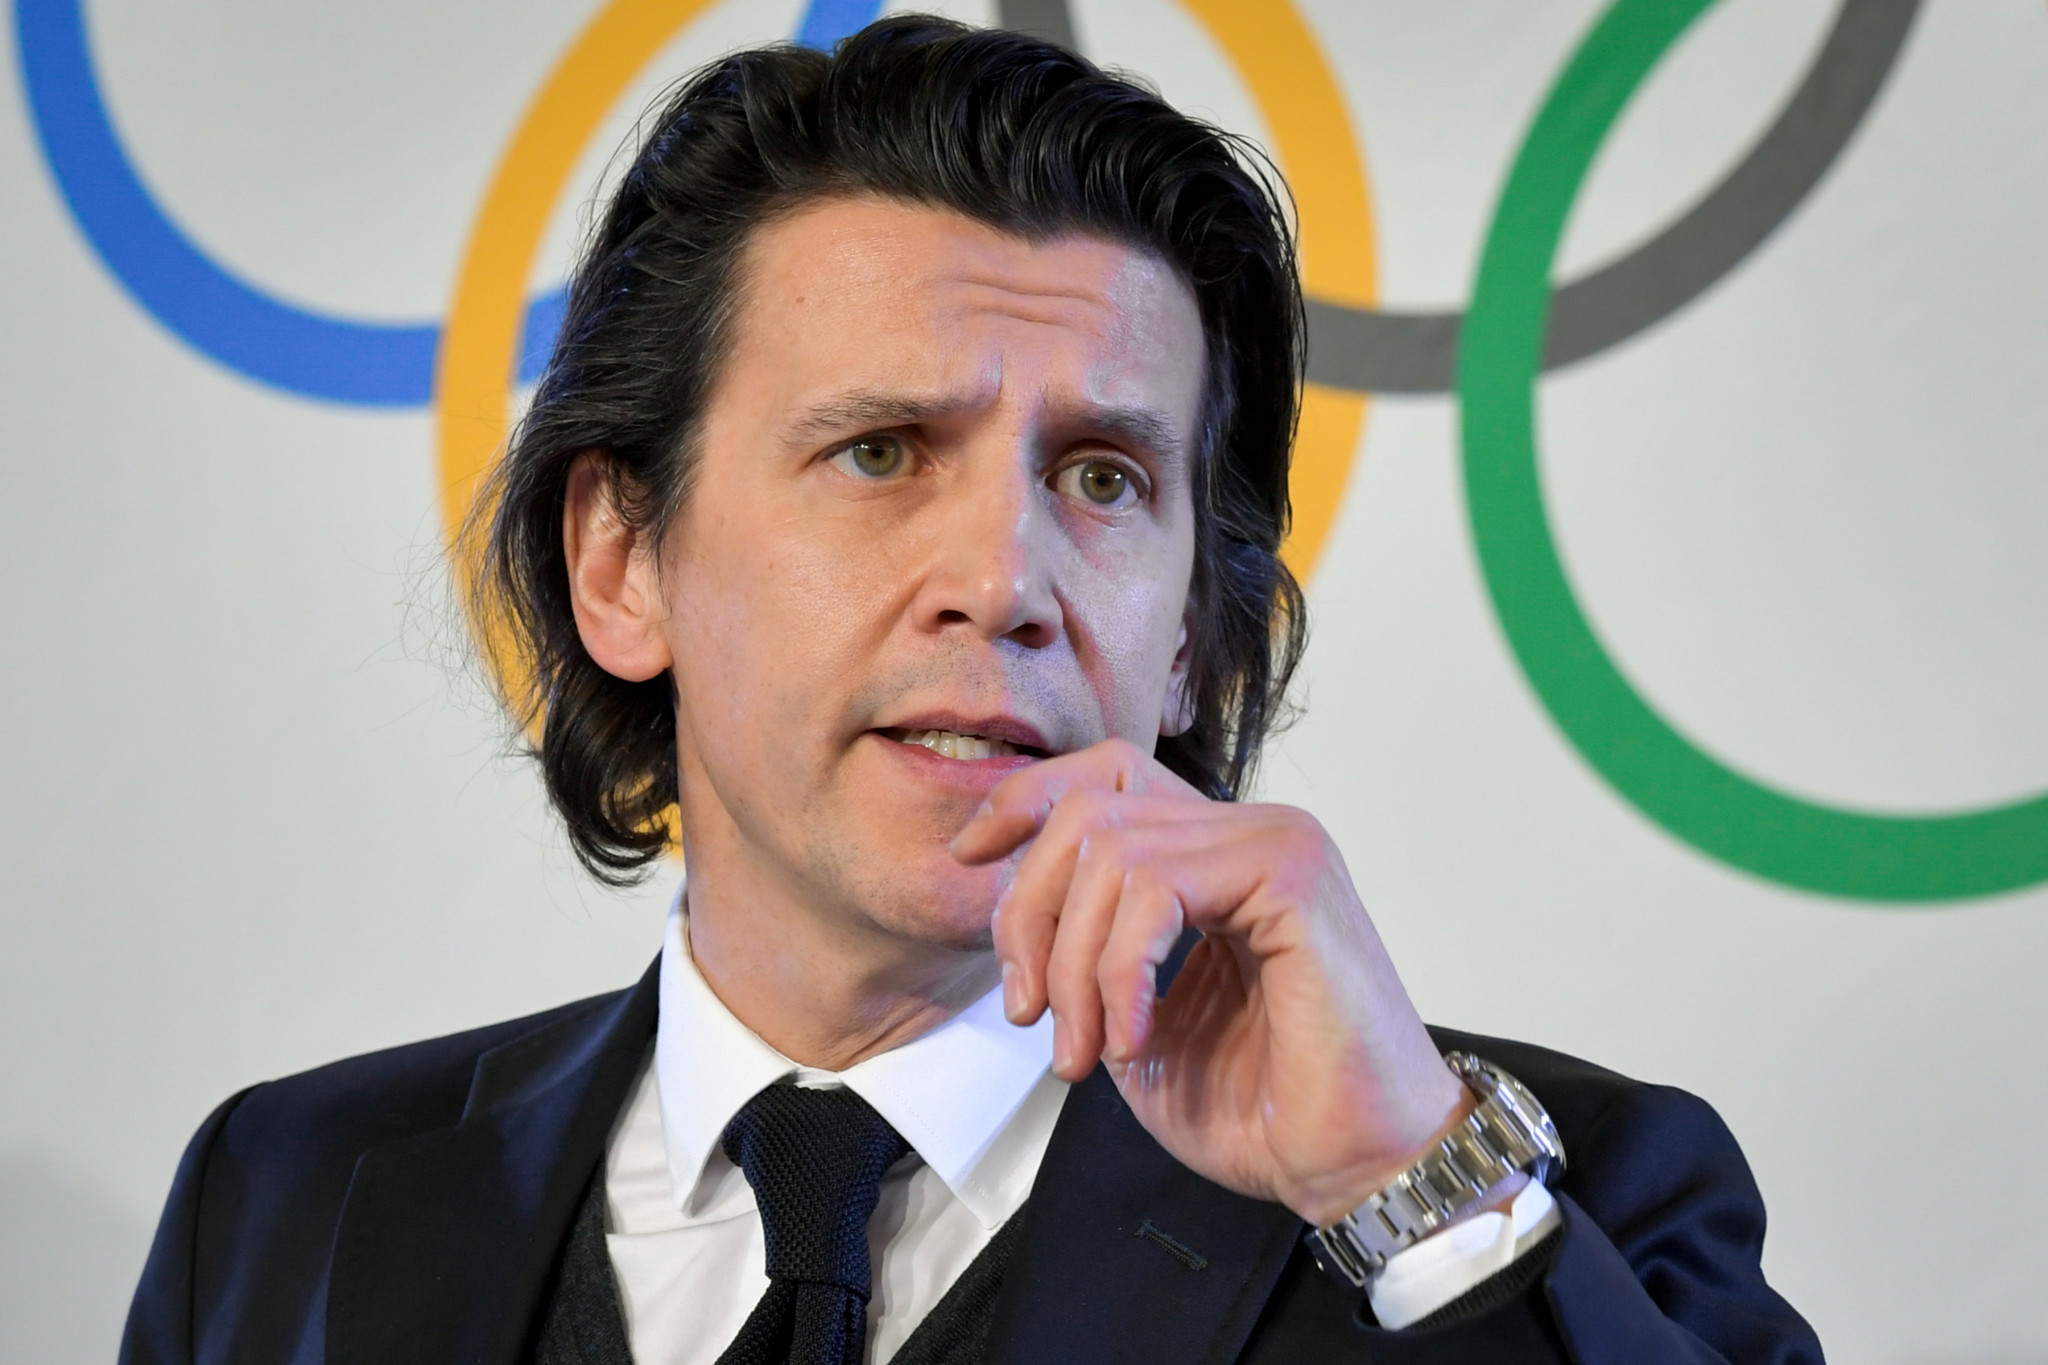 IOC Executive Director for Olympic Games Christophe Dubi has reportedly confirmed that Stockholm is still a candidate to host the 2026 Winter Olympics ©Getty Images